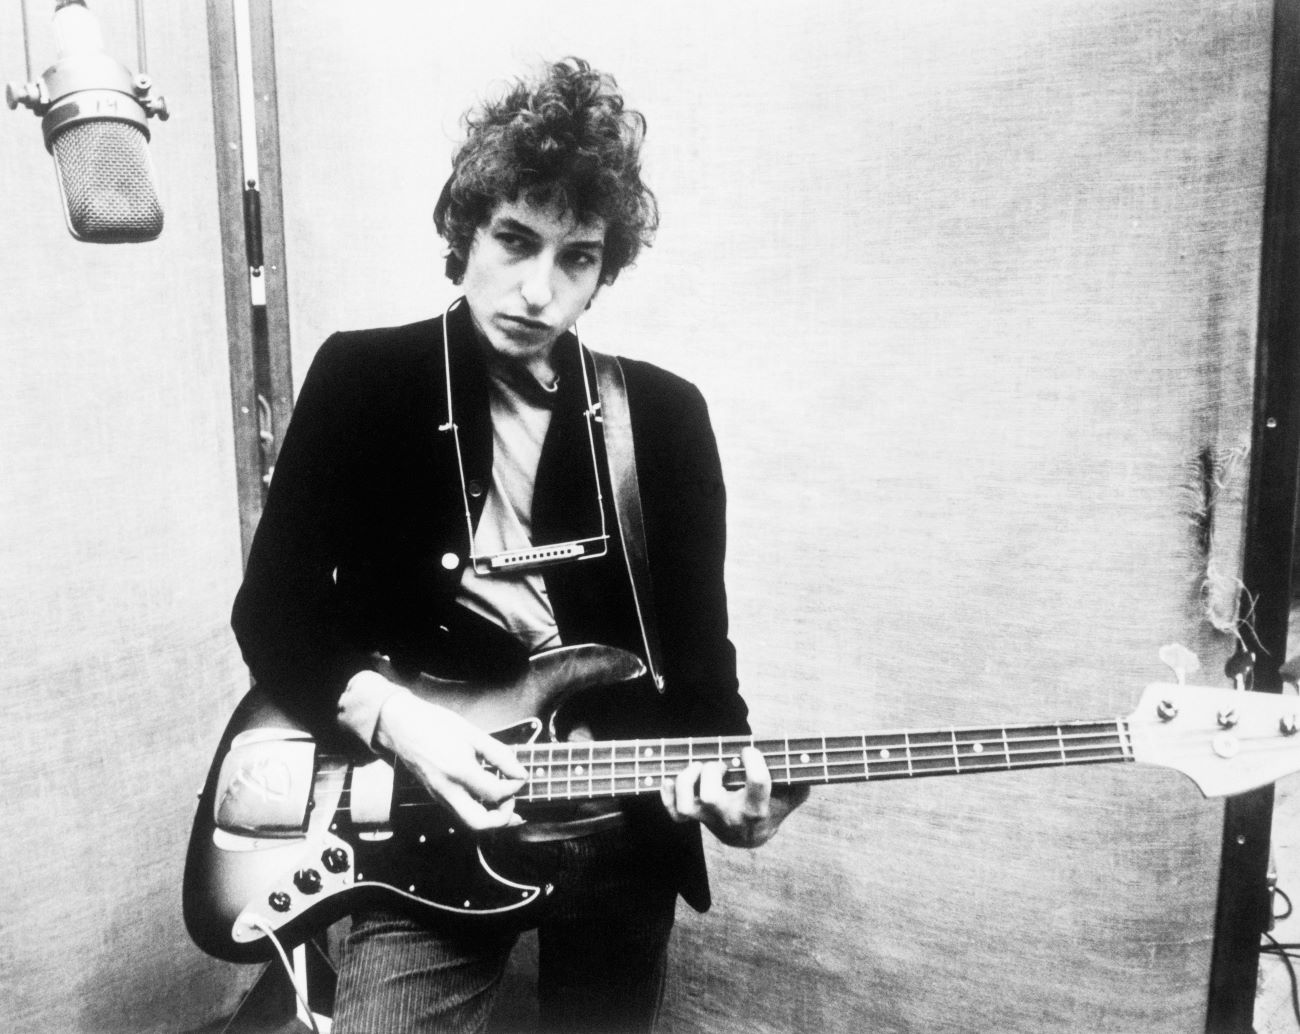 A black and white picture of Bob Dylan holding a guitar with a harmonica around his neck.